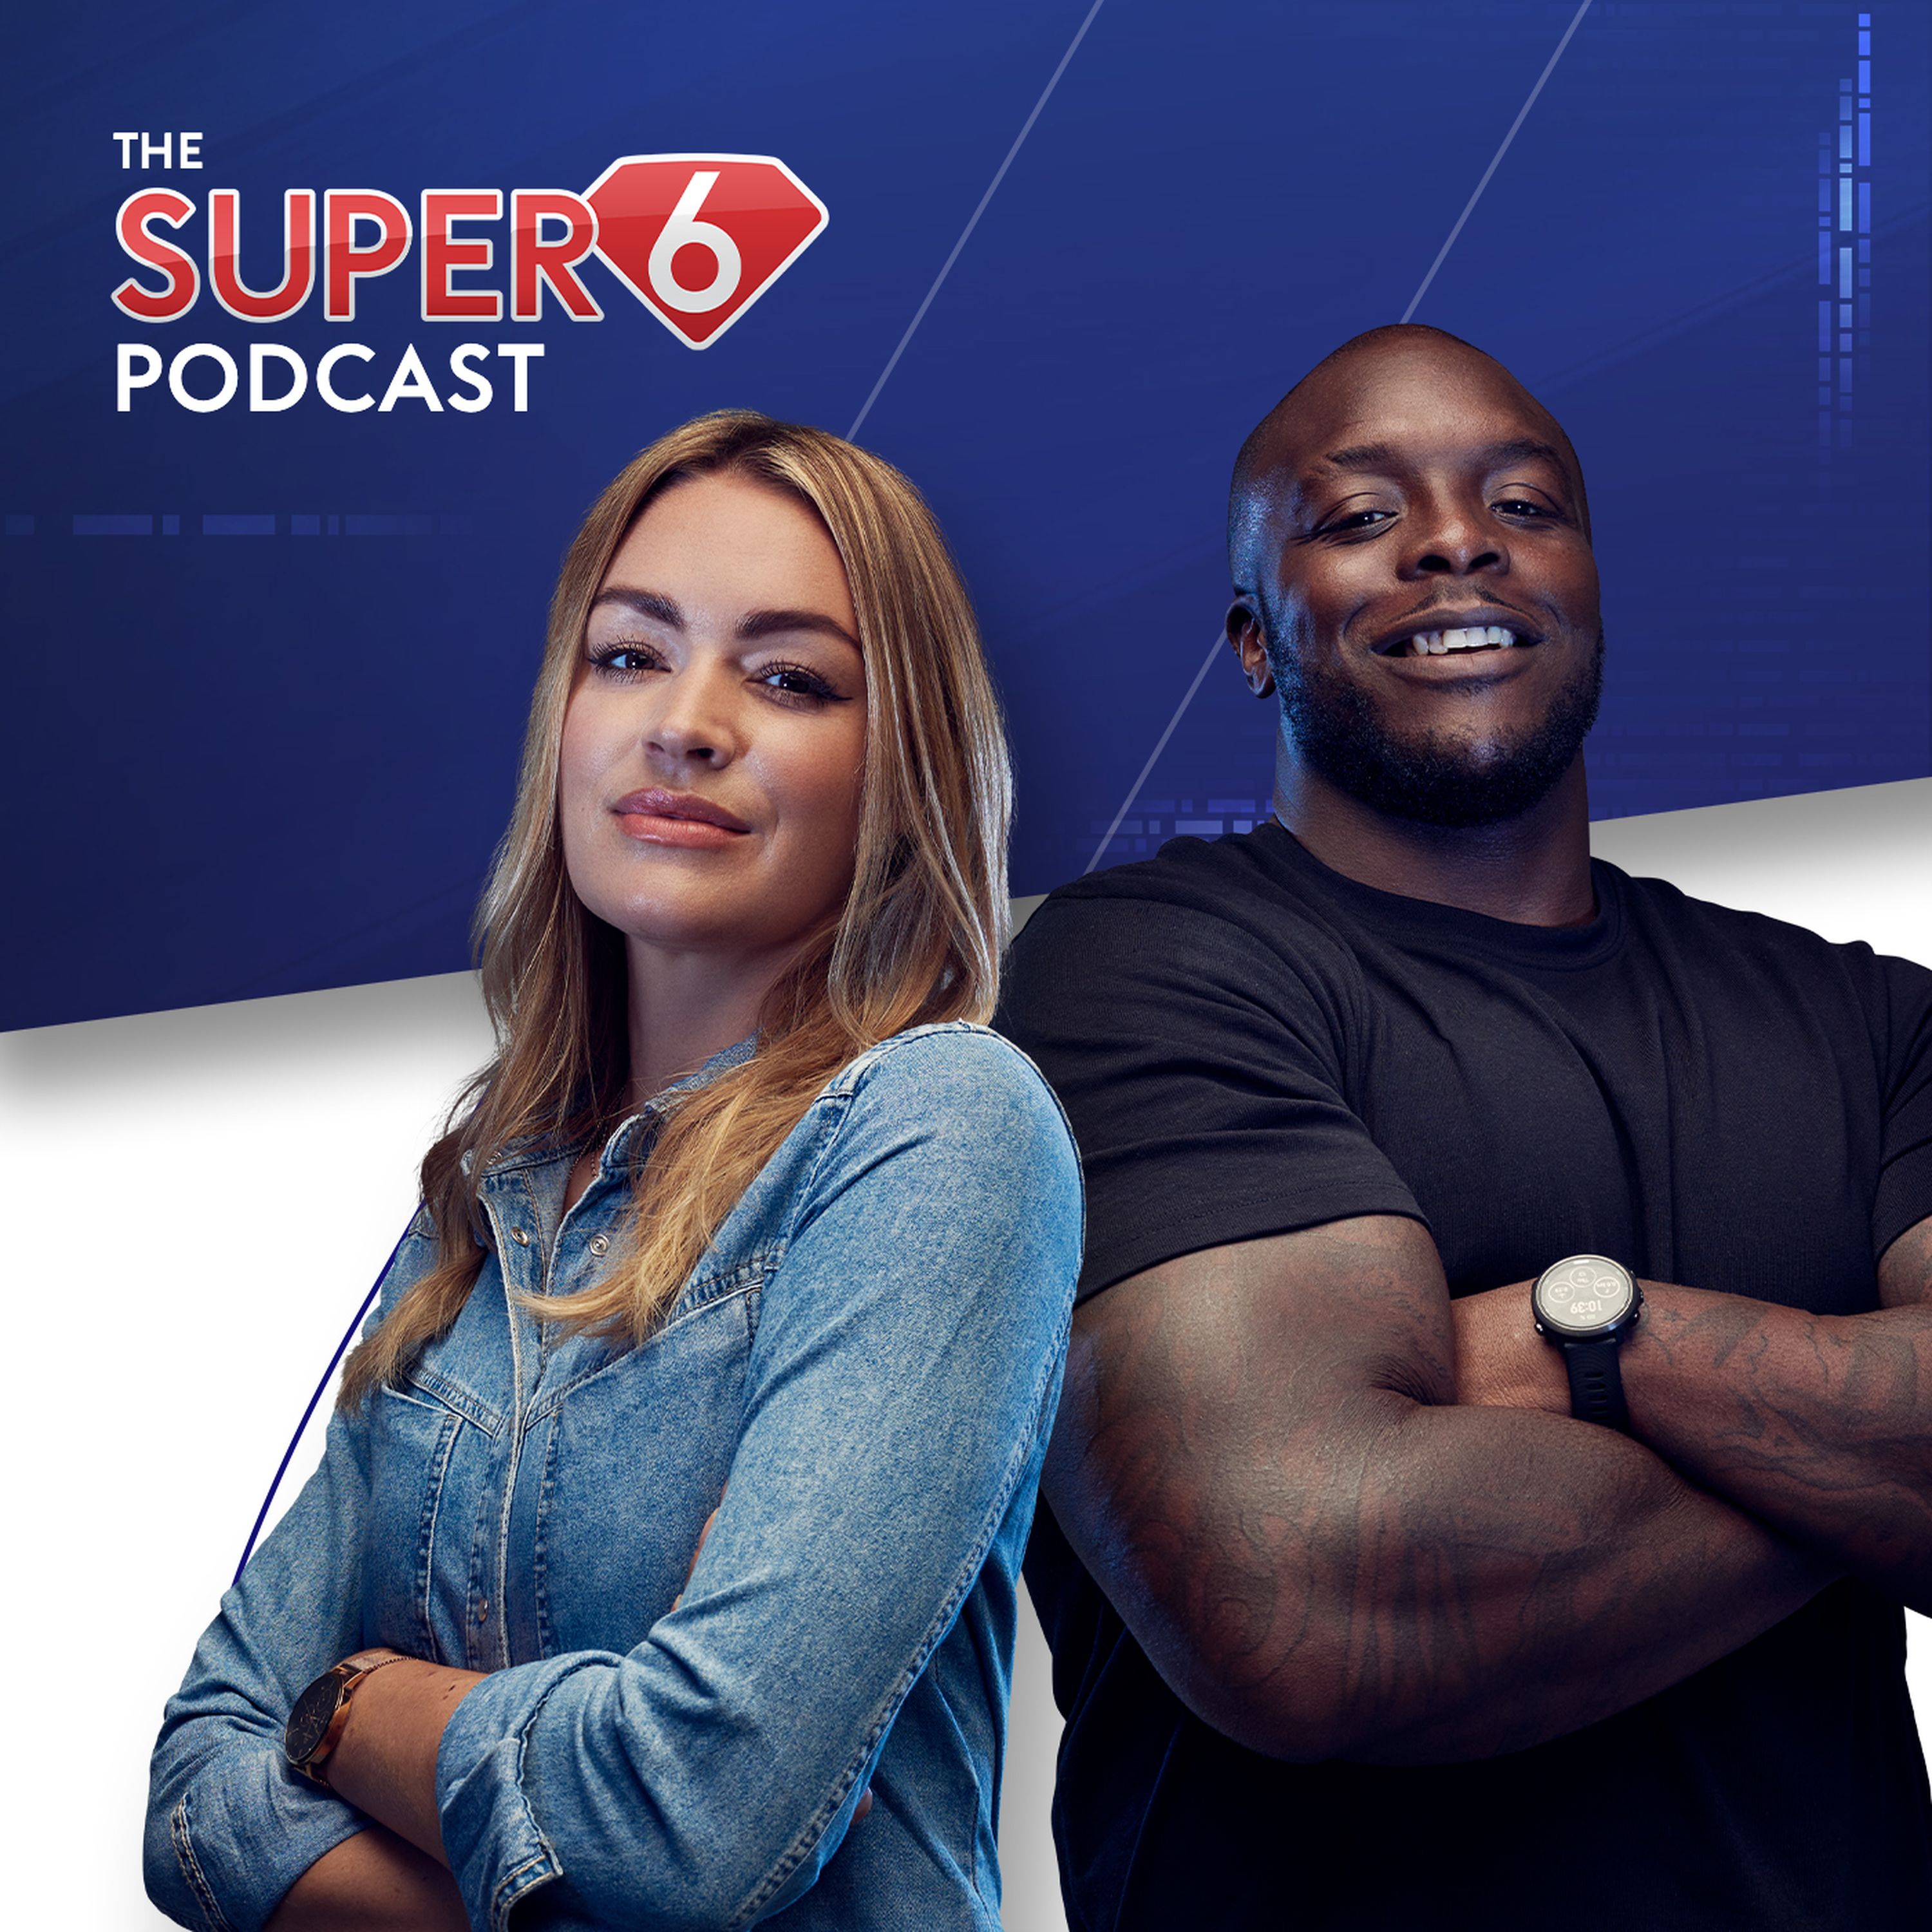 Introducing The Super 6 Podcast!